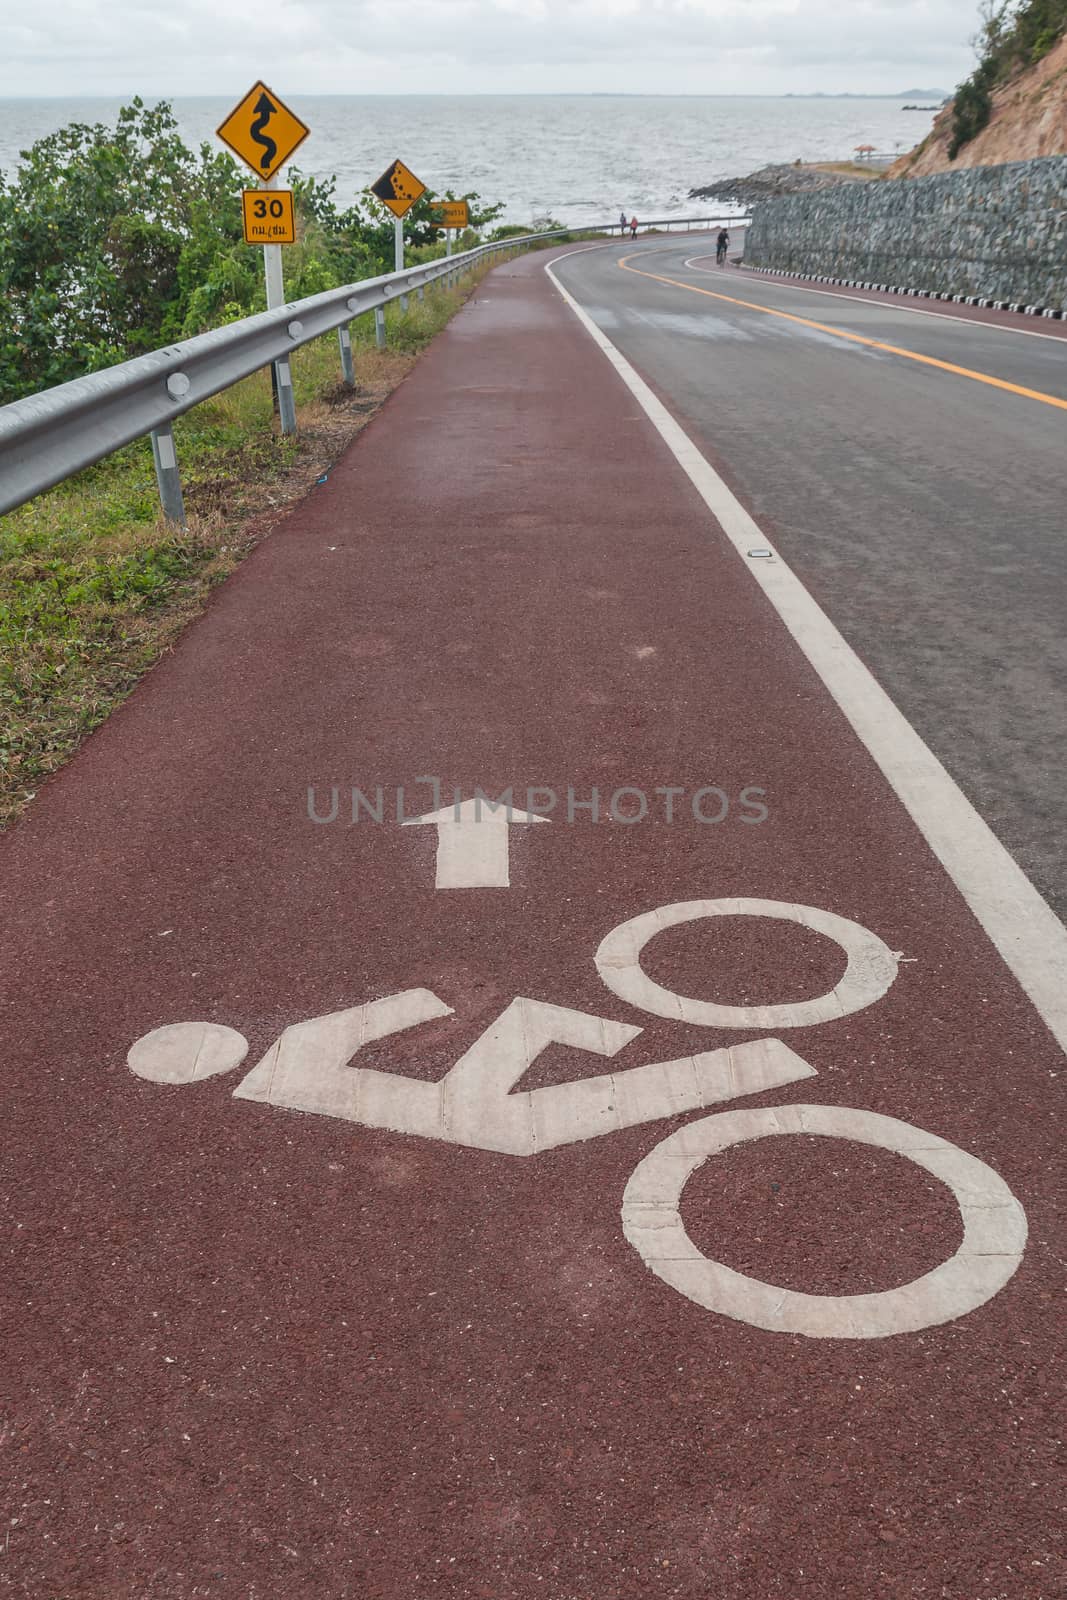 Cyclists symbol sign painted on the road.